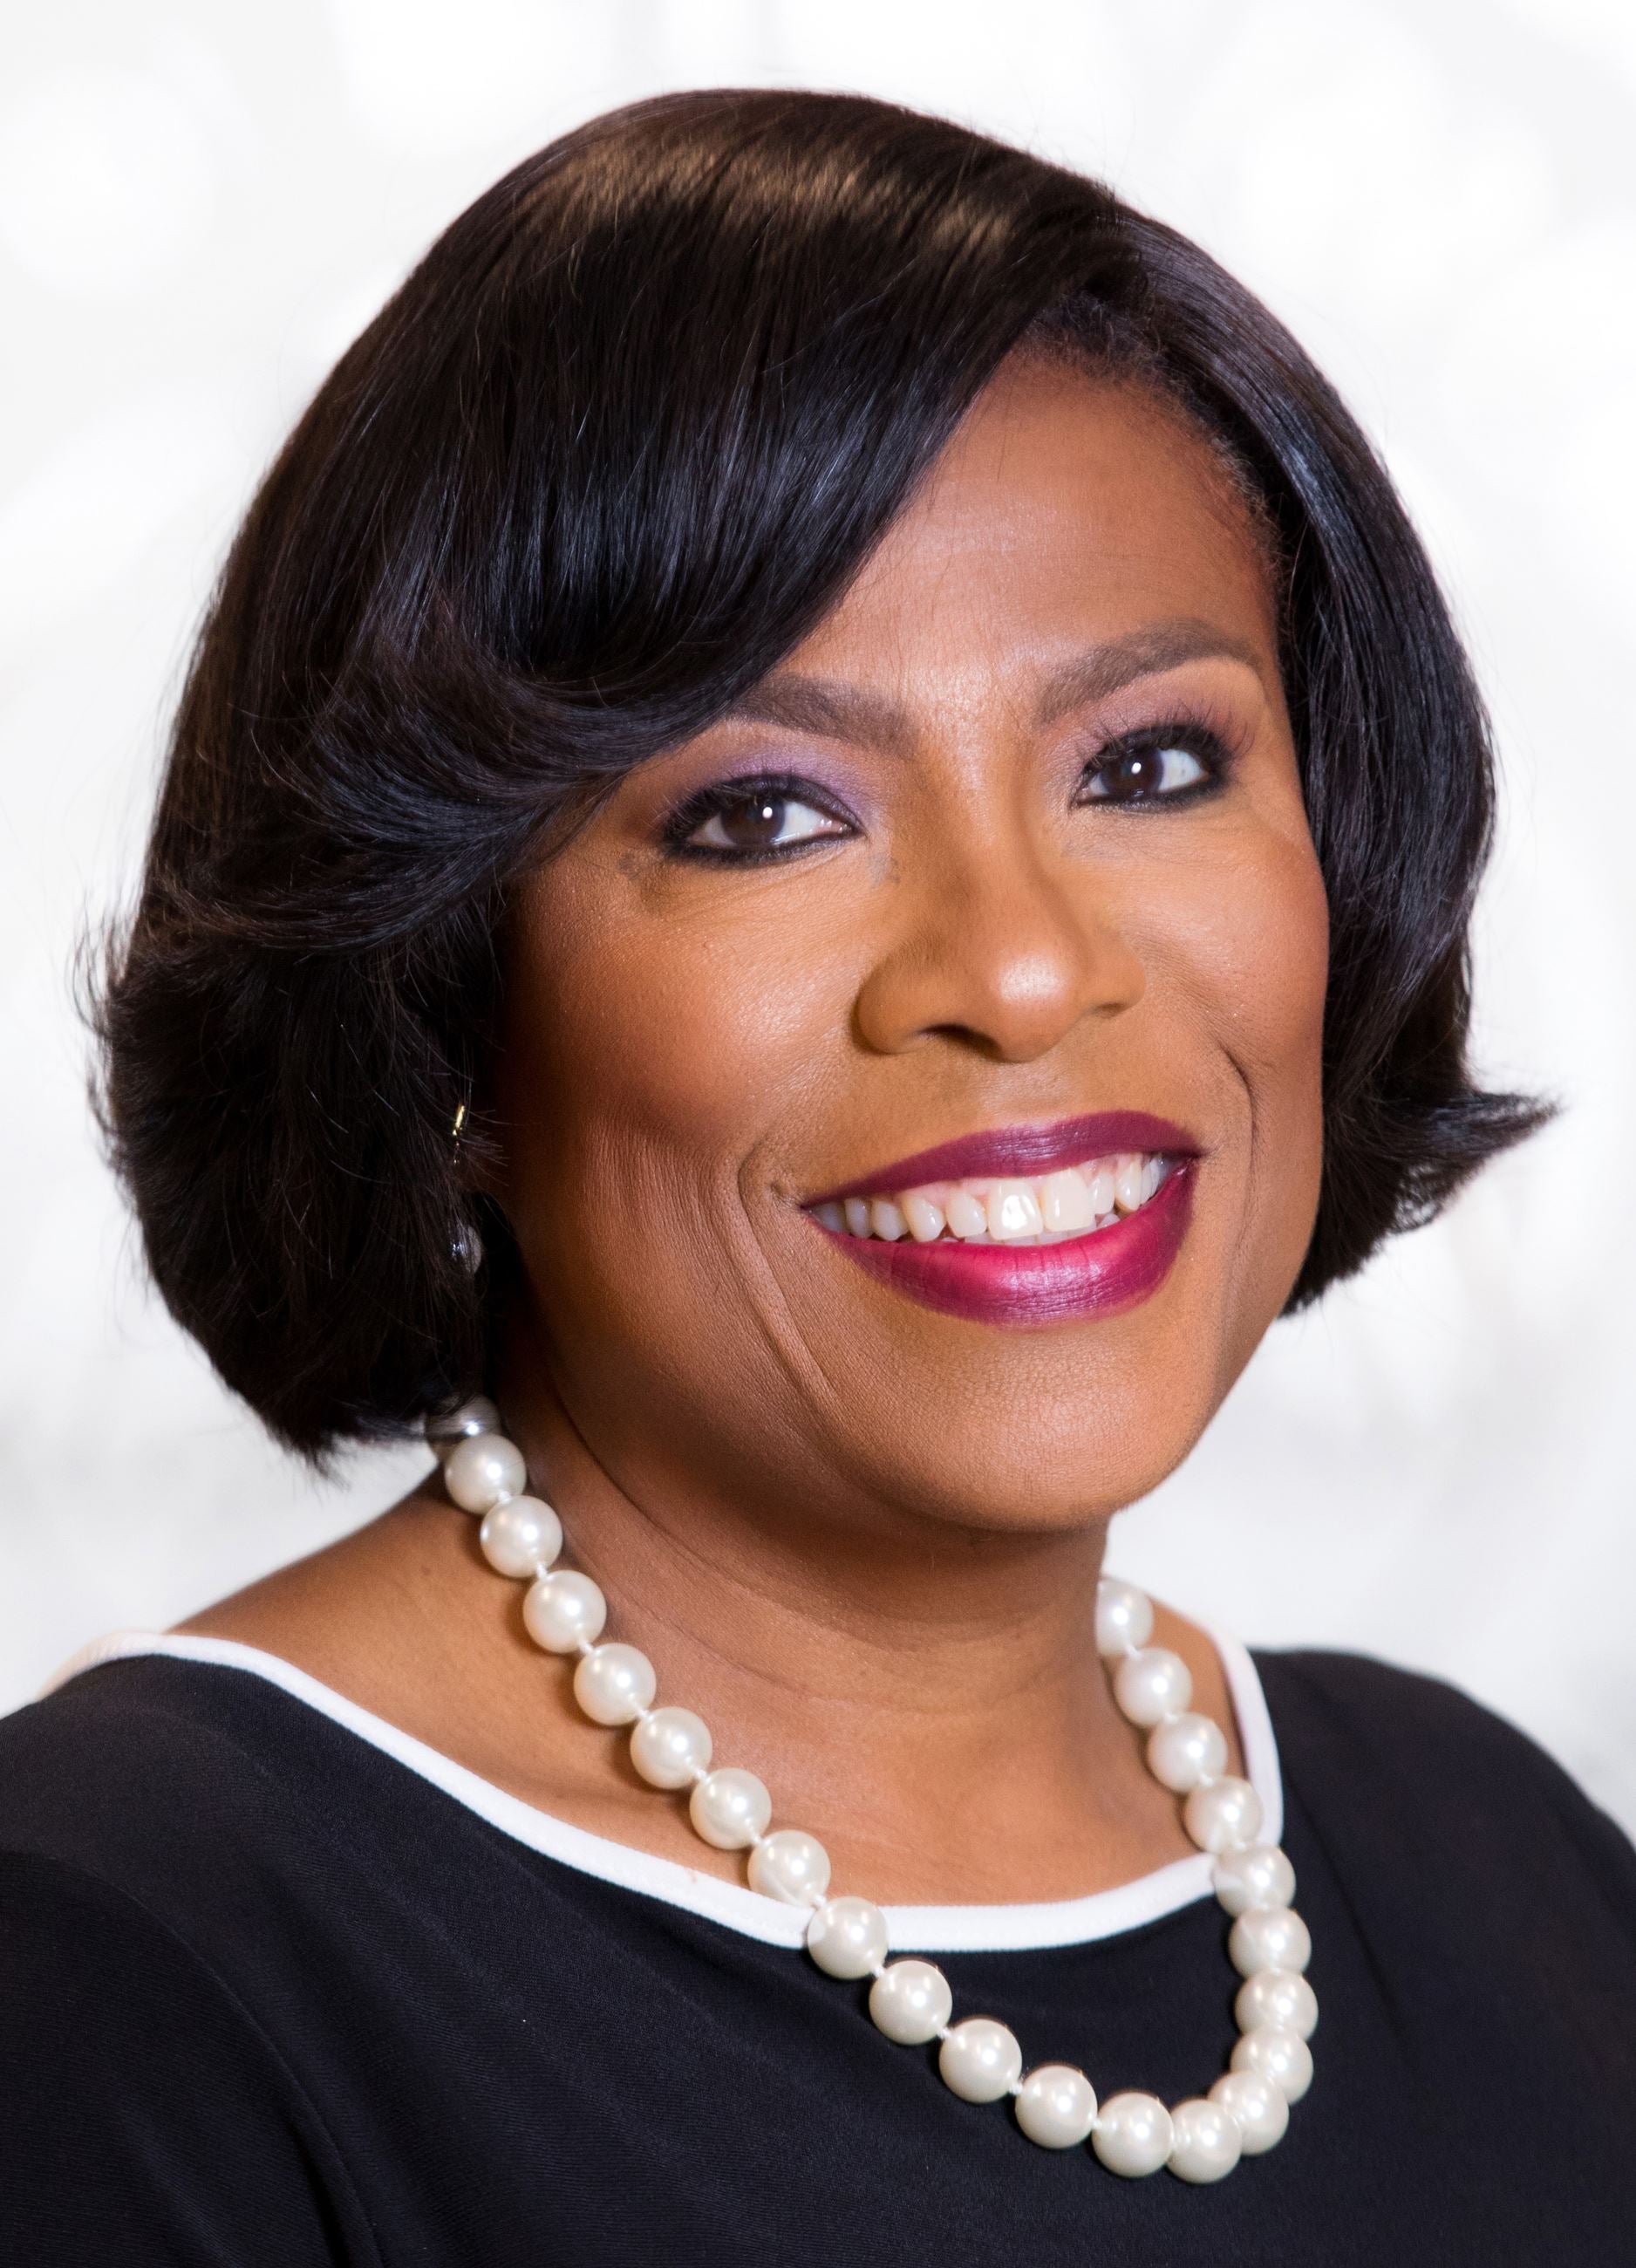 Baton Rouge Mayor Sharon Weston Broome Is Working To Put All Her Constituents On The Path To Success